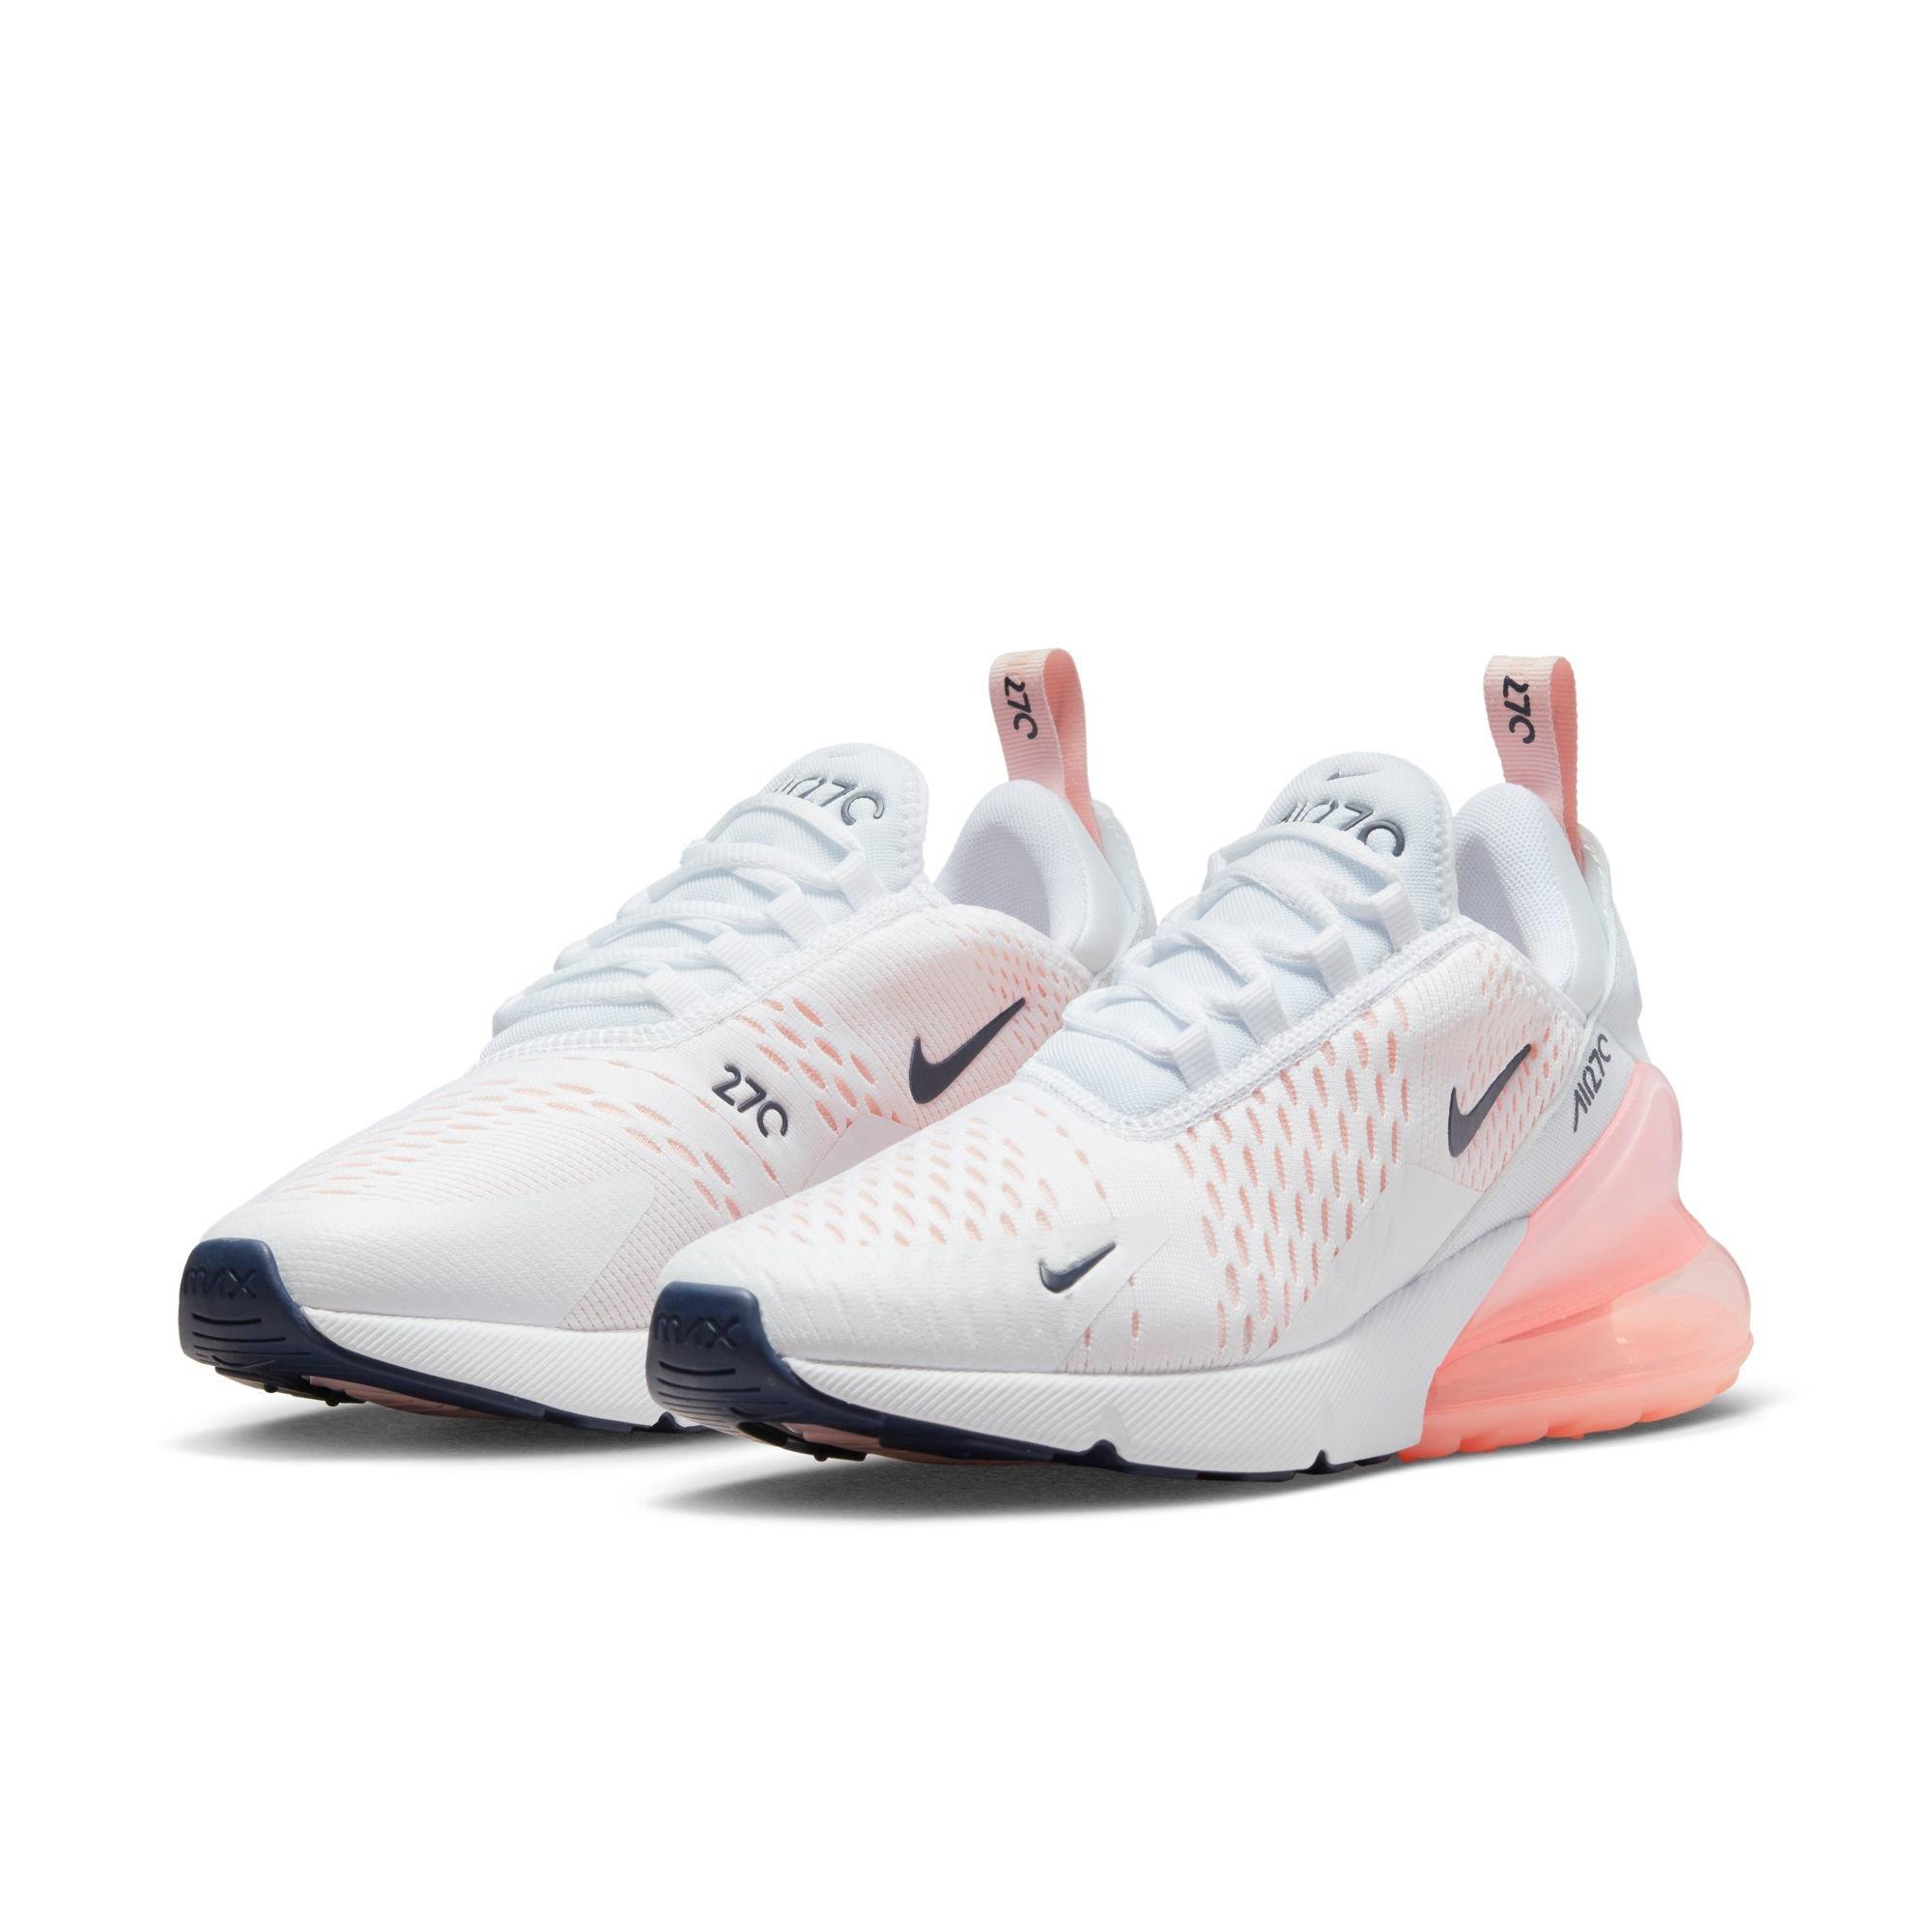 white and navy air max 270